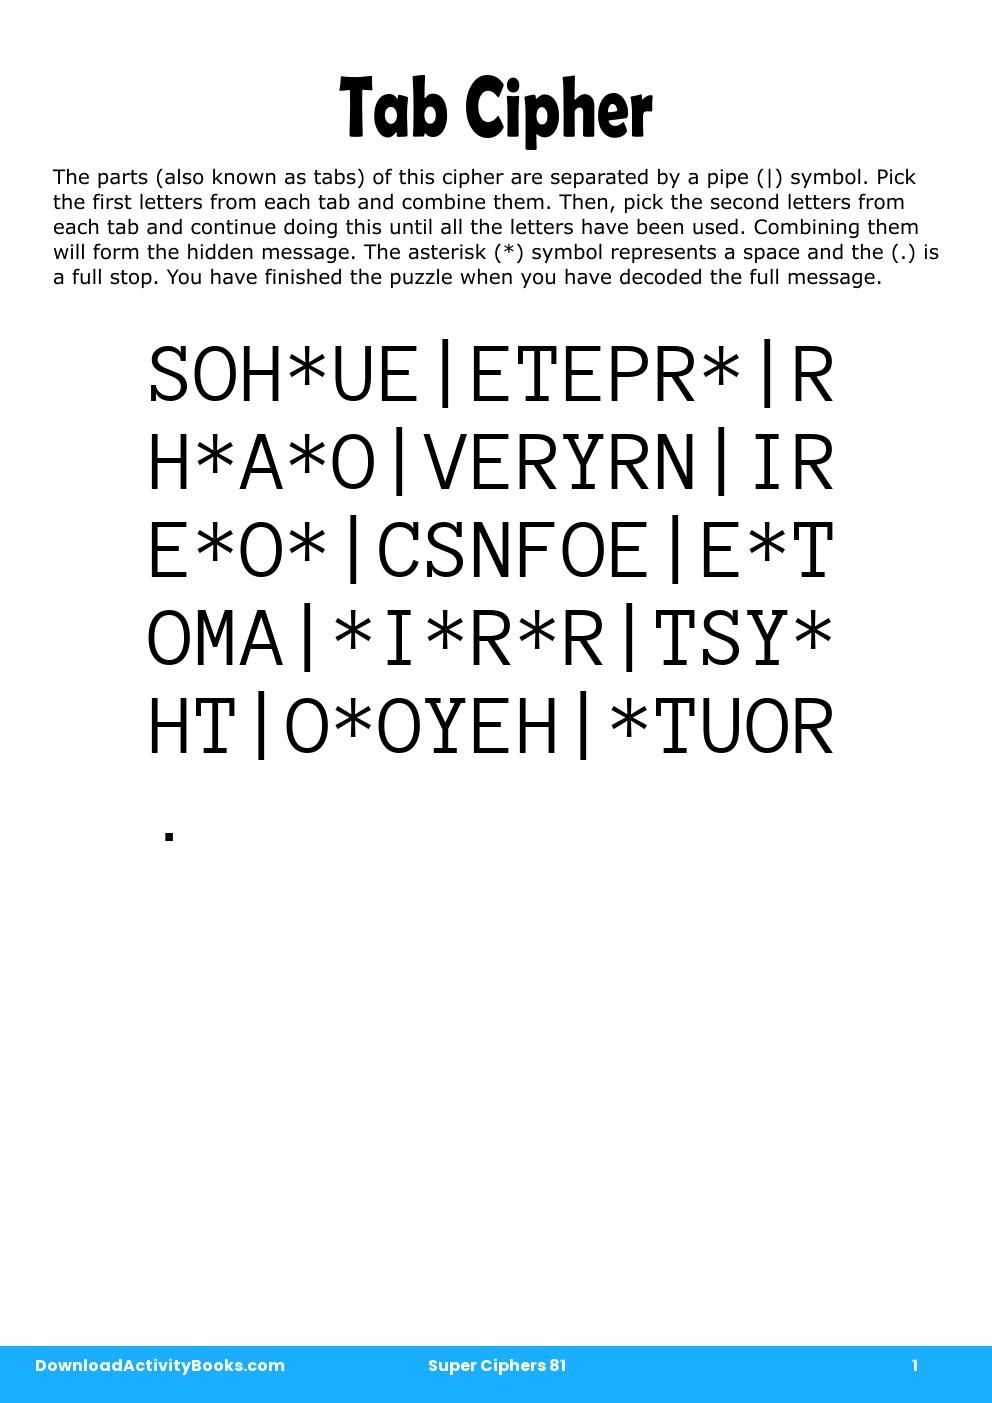 Tab Cipher in Super Ciphers 81